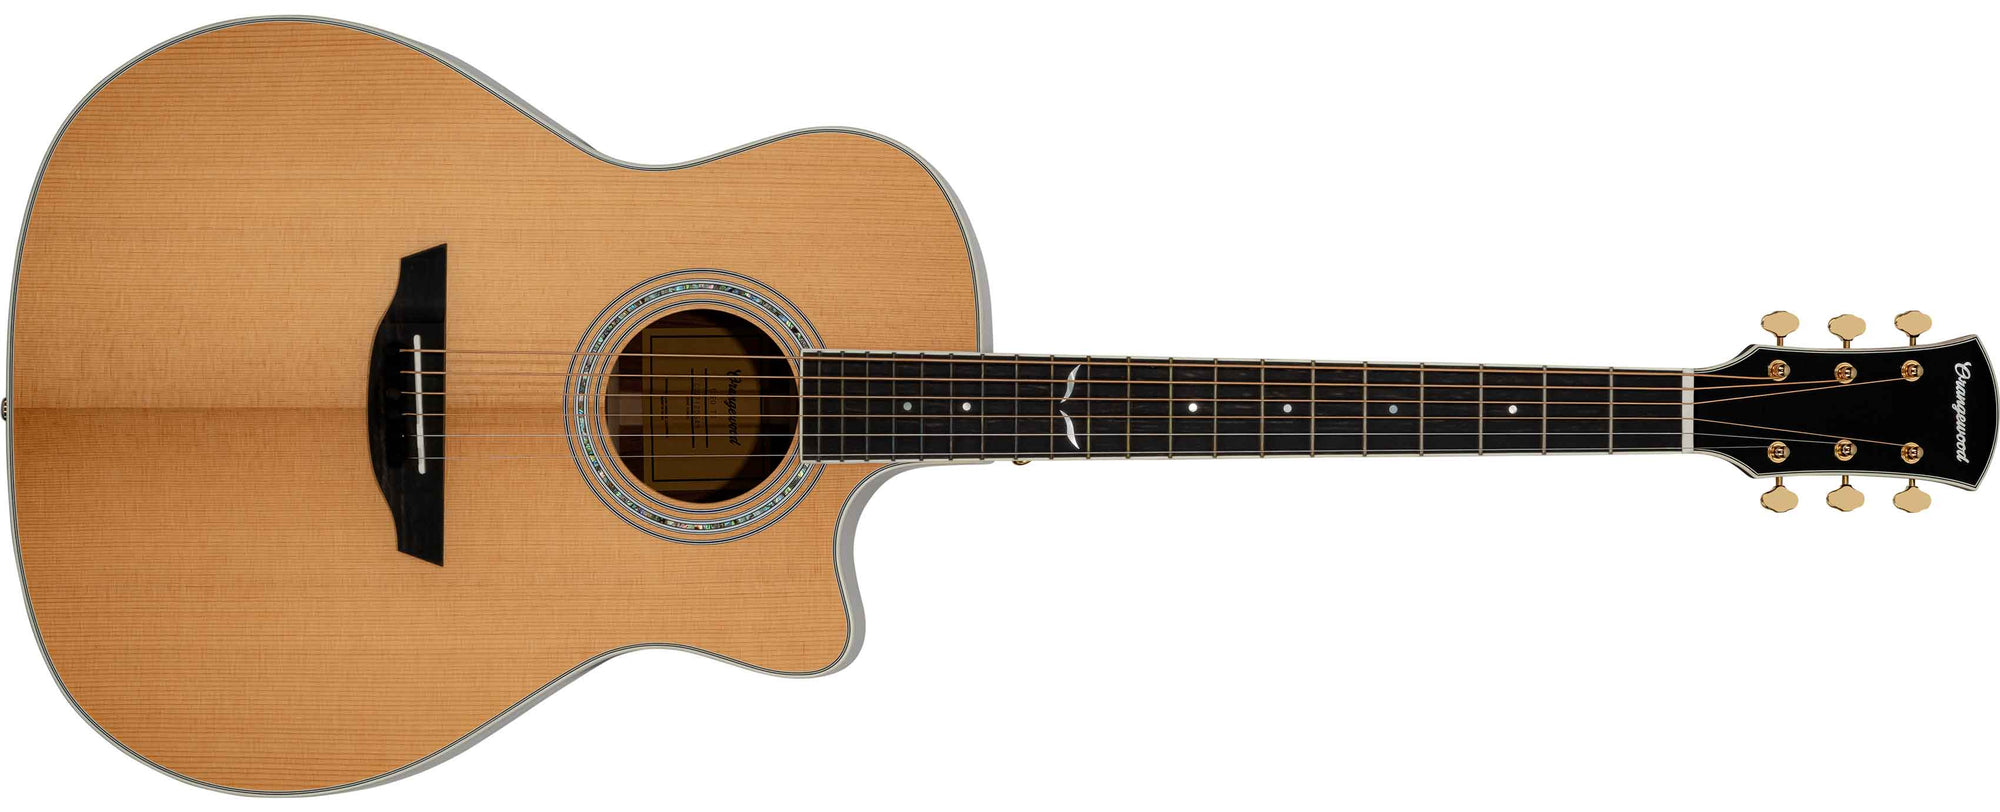 Torrefied spruce grand auditorium cutaway acoustic guitar with ebony fretboard, mother of pearl fretboard inlays, abalone rosette, and gold hardware